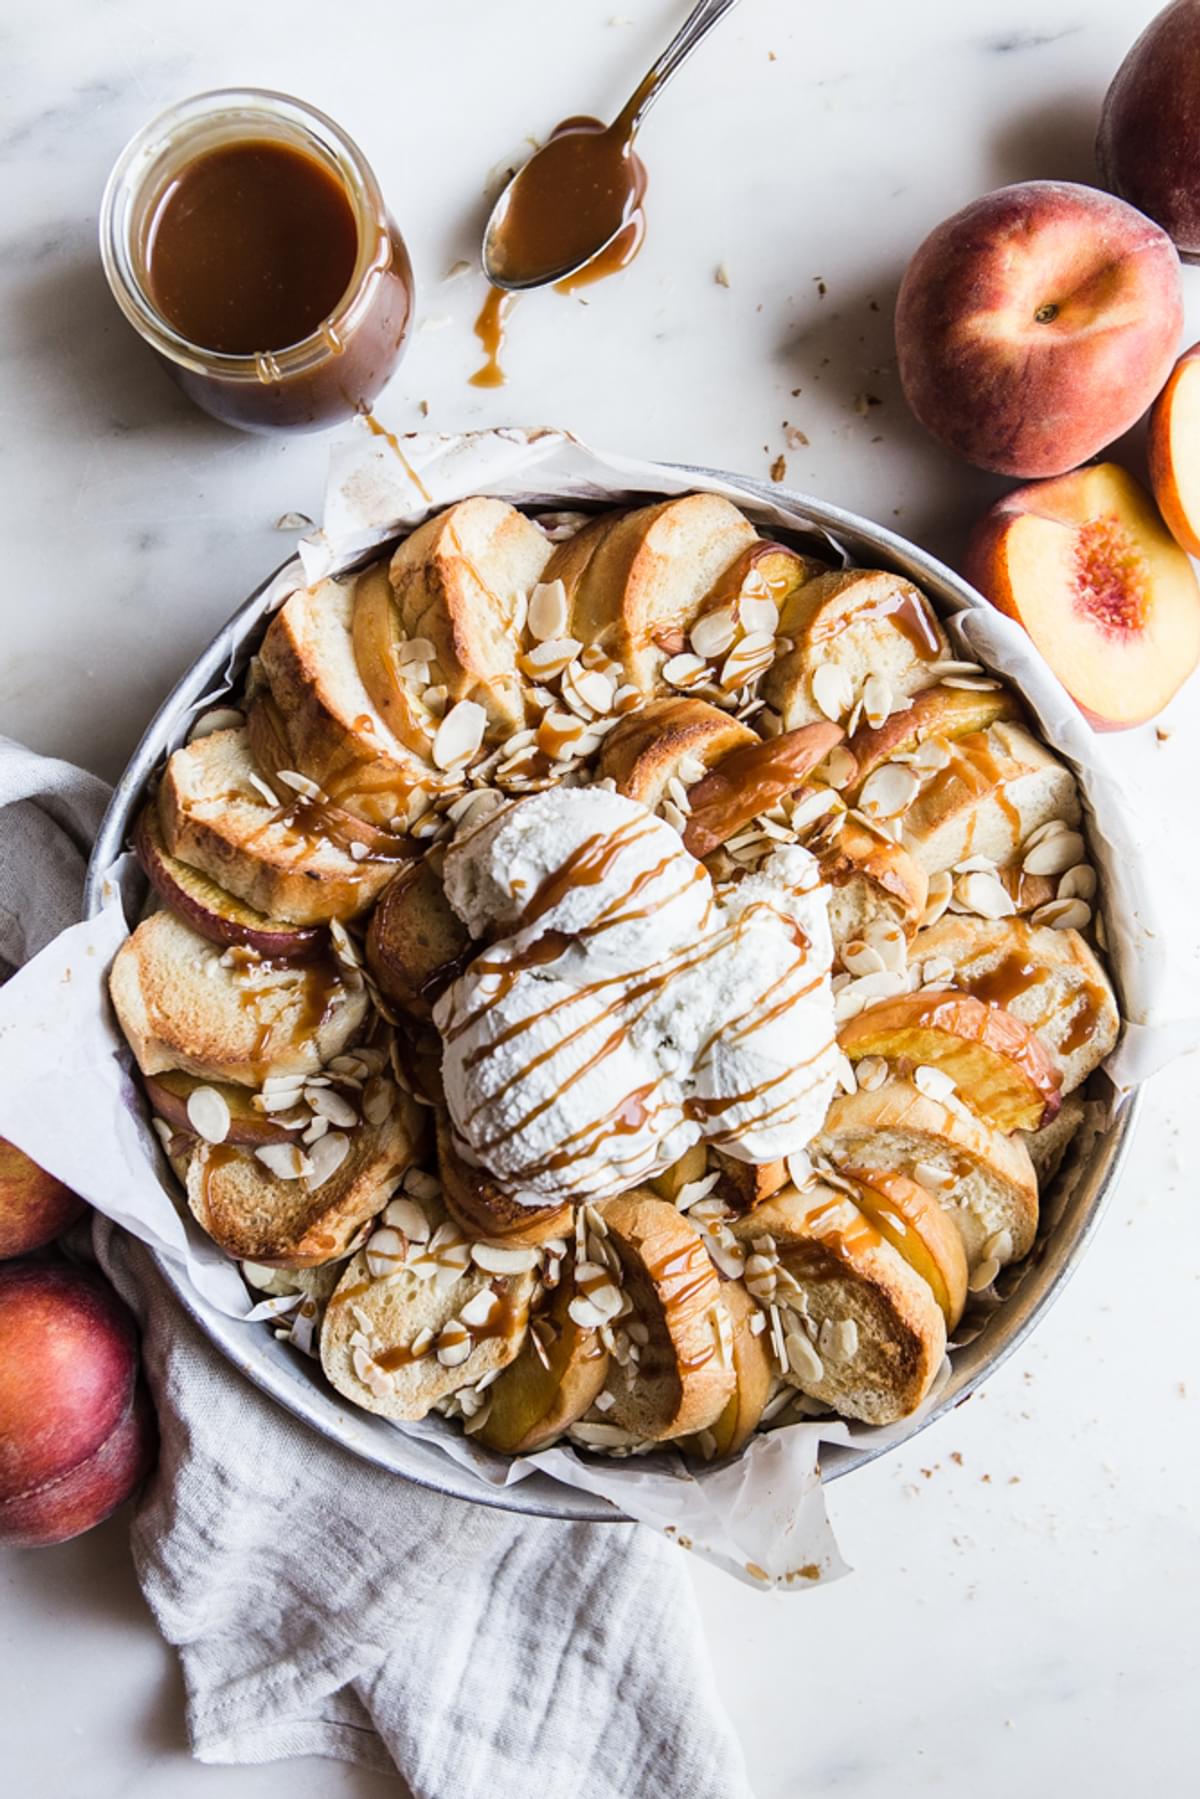 Almond Peach Bread Pudding with ice cream and caramel sauce